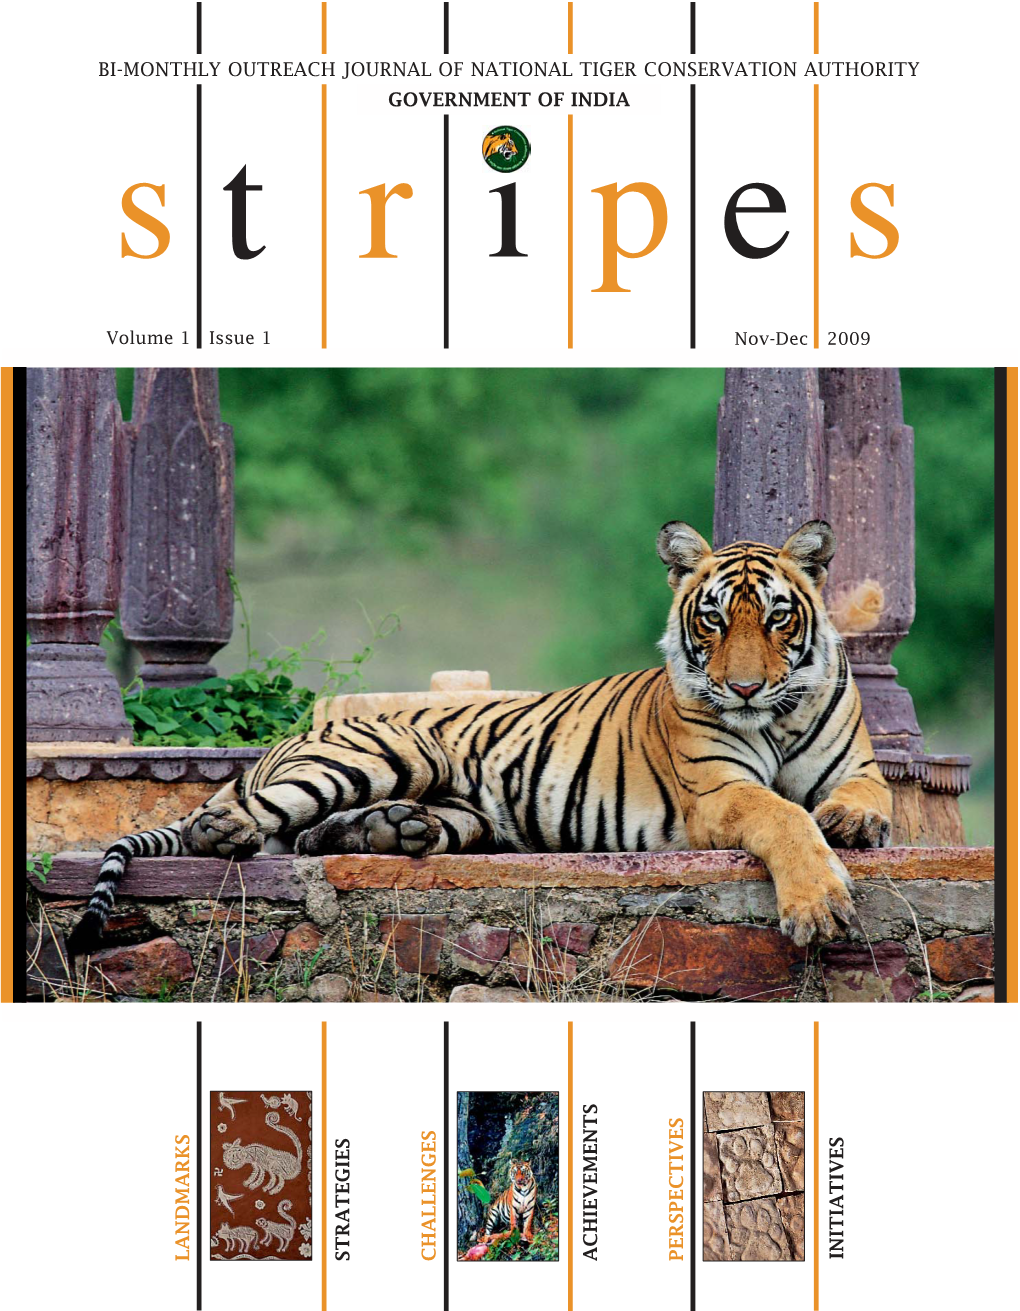 BI-MONTHLY OUTREACH JOURNAL of NATIONAL TIGER CONSERVATION AUTHORITY S T Rgovernmenti of Indiap E S